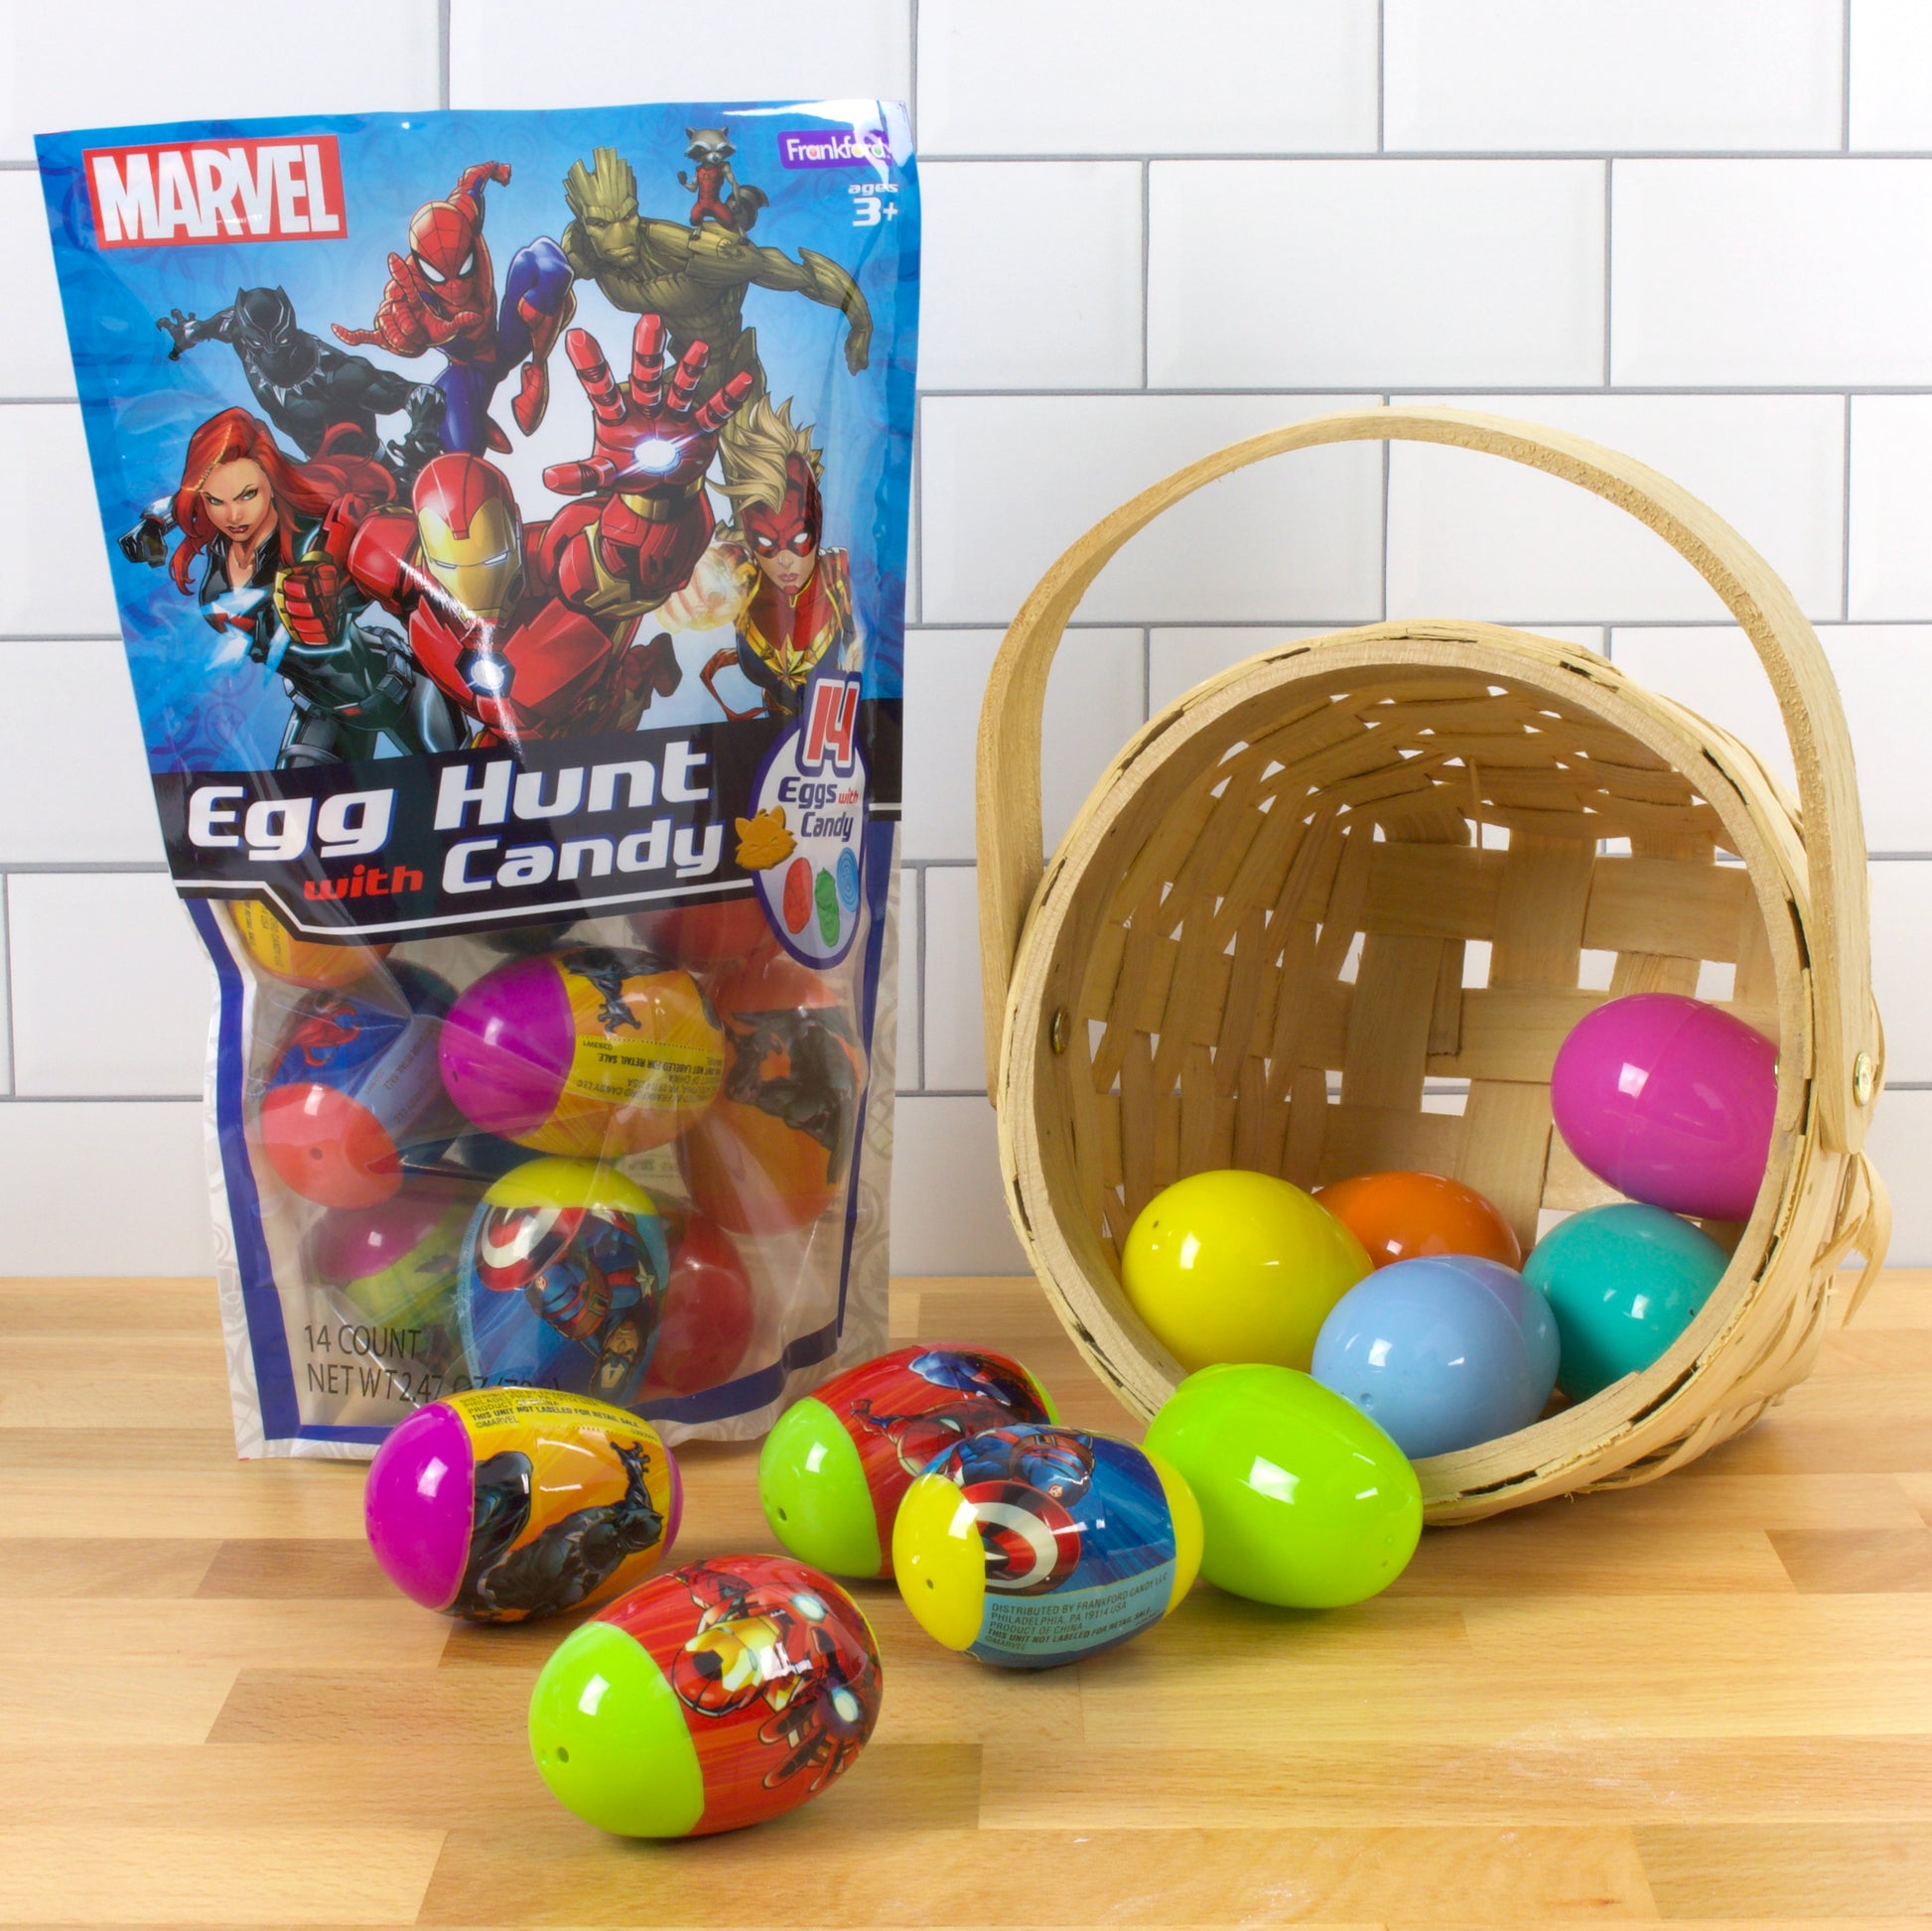 blue bag with marvel characters and colorful plastic eggs with straw basket and plastic eggs